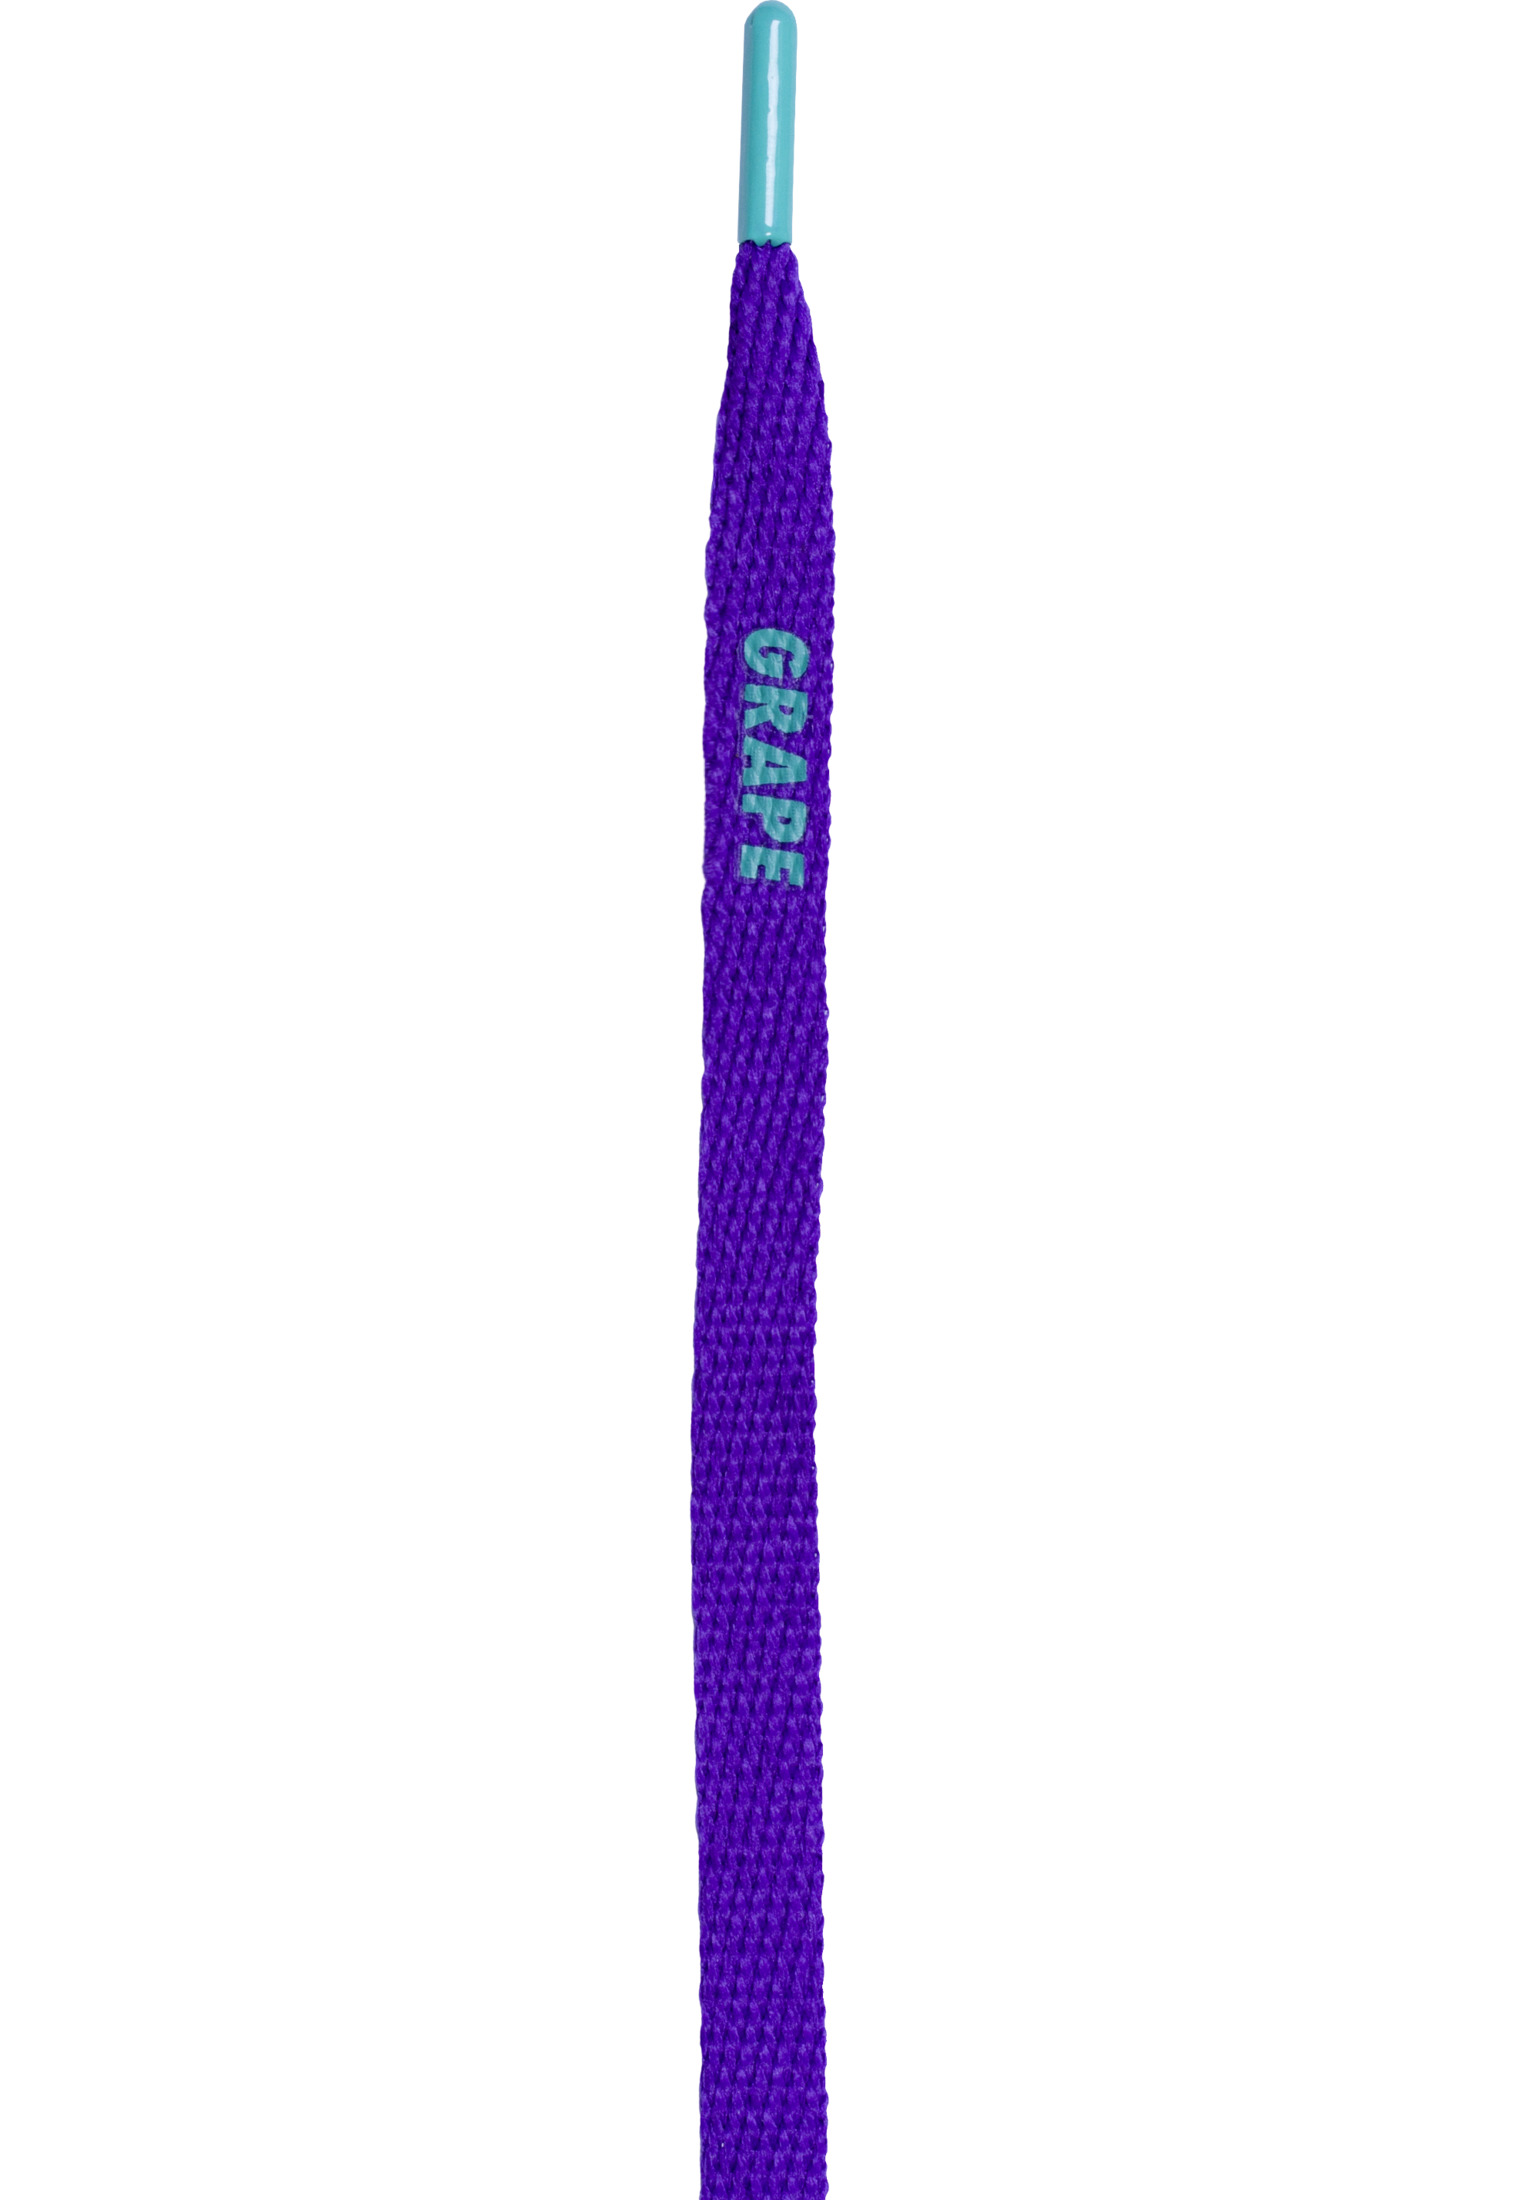 Laces Tubelaces Hook UP Pack (5er) in Farbe grape